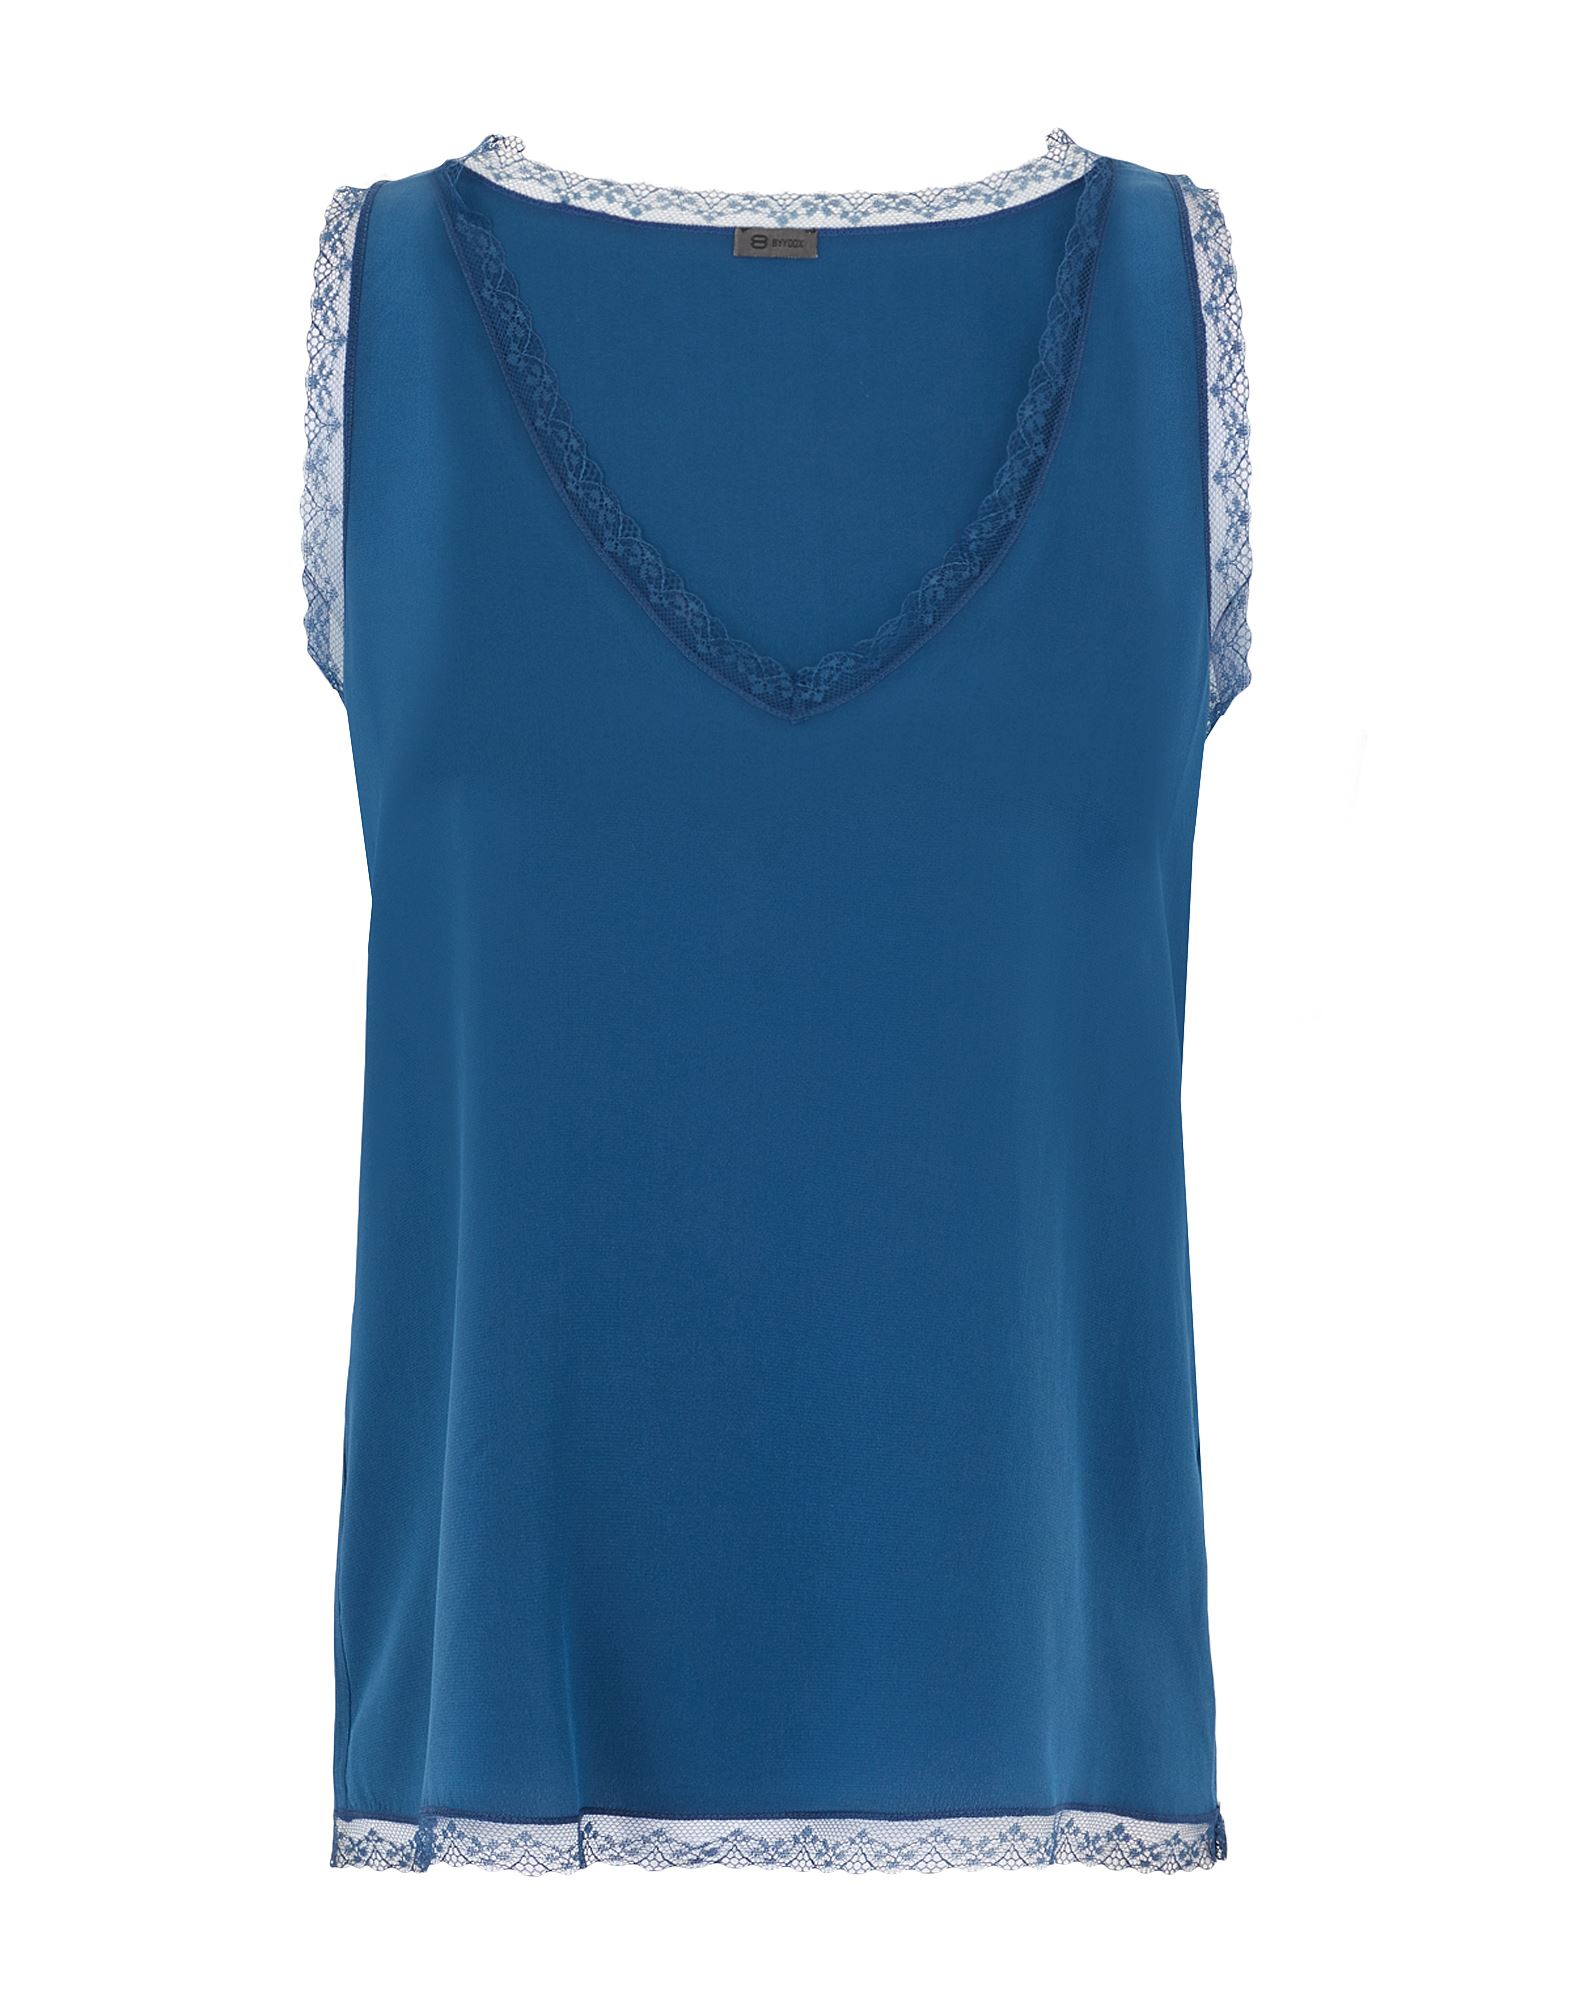 ԥ볫8 by YOOX ǥ ȥåץ ߥåɥʥȥ֥롼 38 륯 100% SILK LACE-TRIMMED CAMISOLE